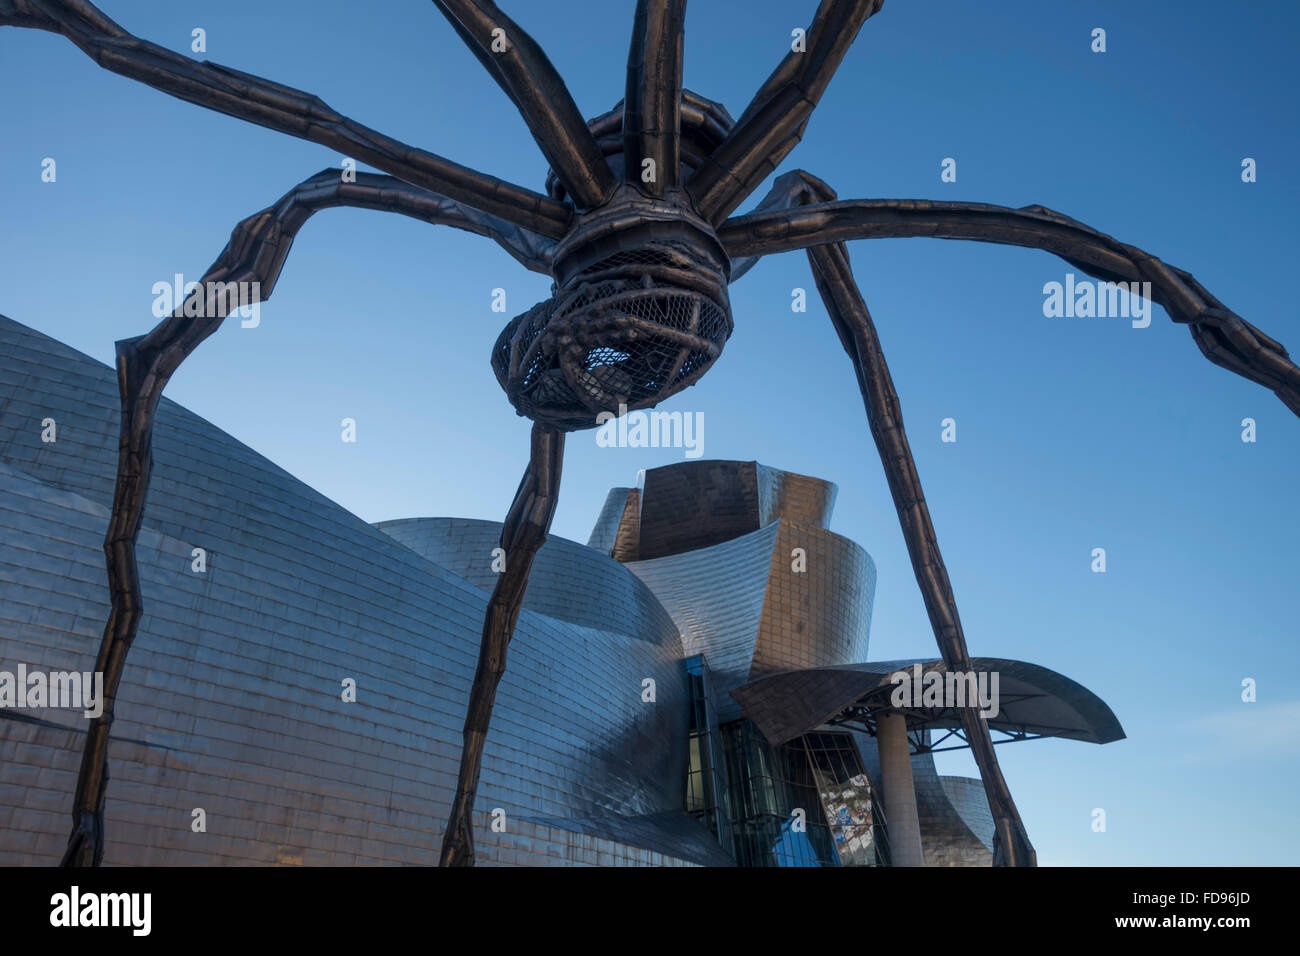 Spider sculpture 'Maman' by Louise Joséphine Bourgeois at the Guggenheim museum, Bilbao Stock Photo